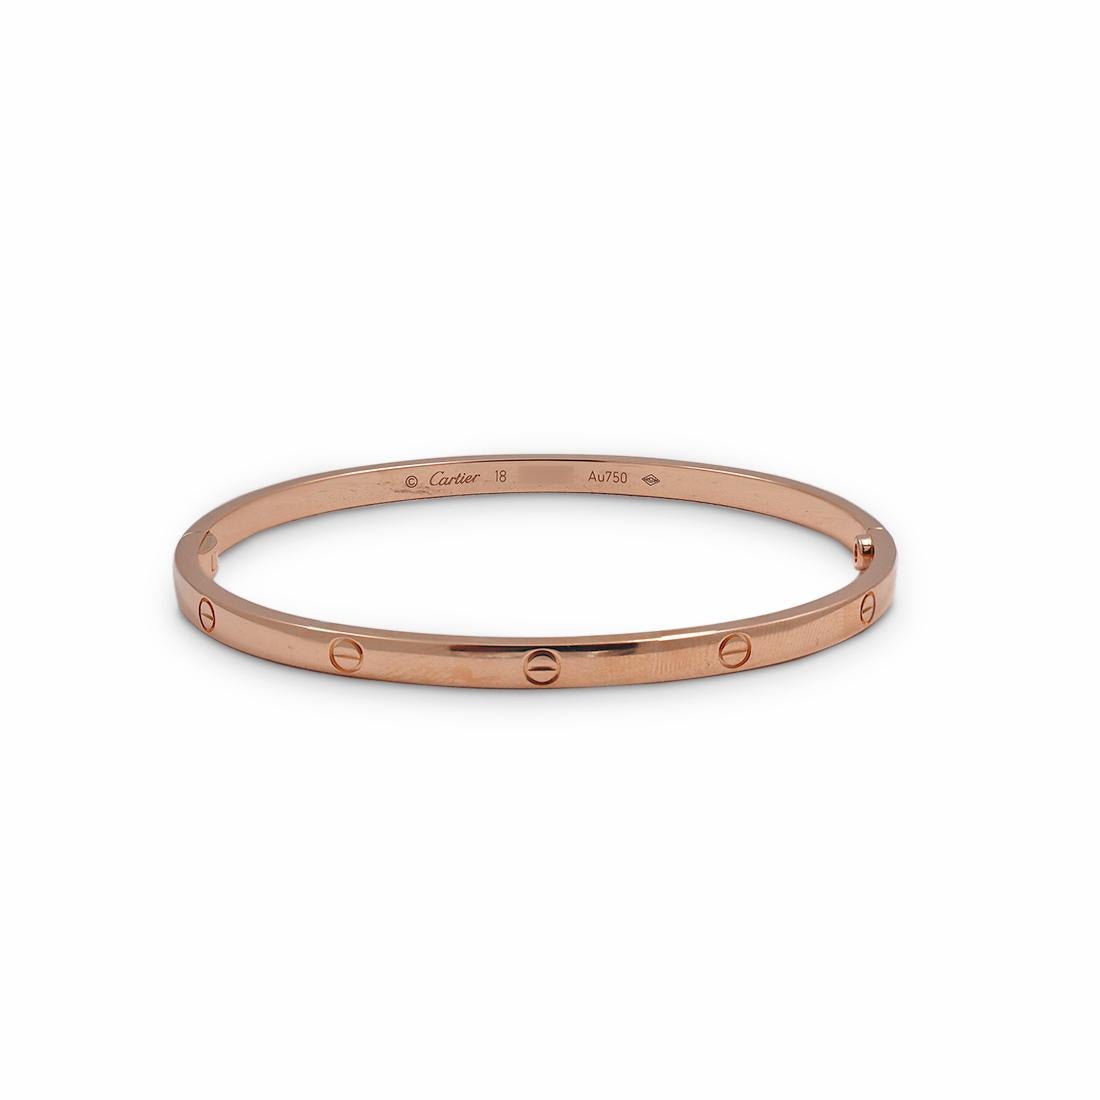 Authentic Cartier 'Love' bracelet crafted in 18 karat rose gold. Size 18. Signed Cartier, 18, Au750, with serial number and hallmarks. The bracelet is presented with a Cartier pouch, service papers, and screwdriver. CIRCA 2010s.

Brand: Cartier